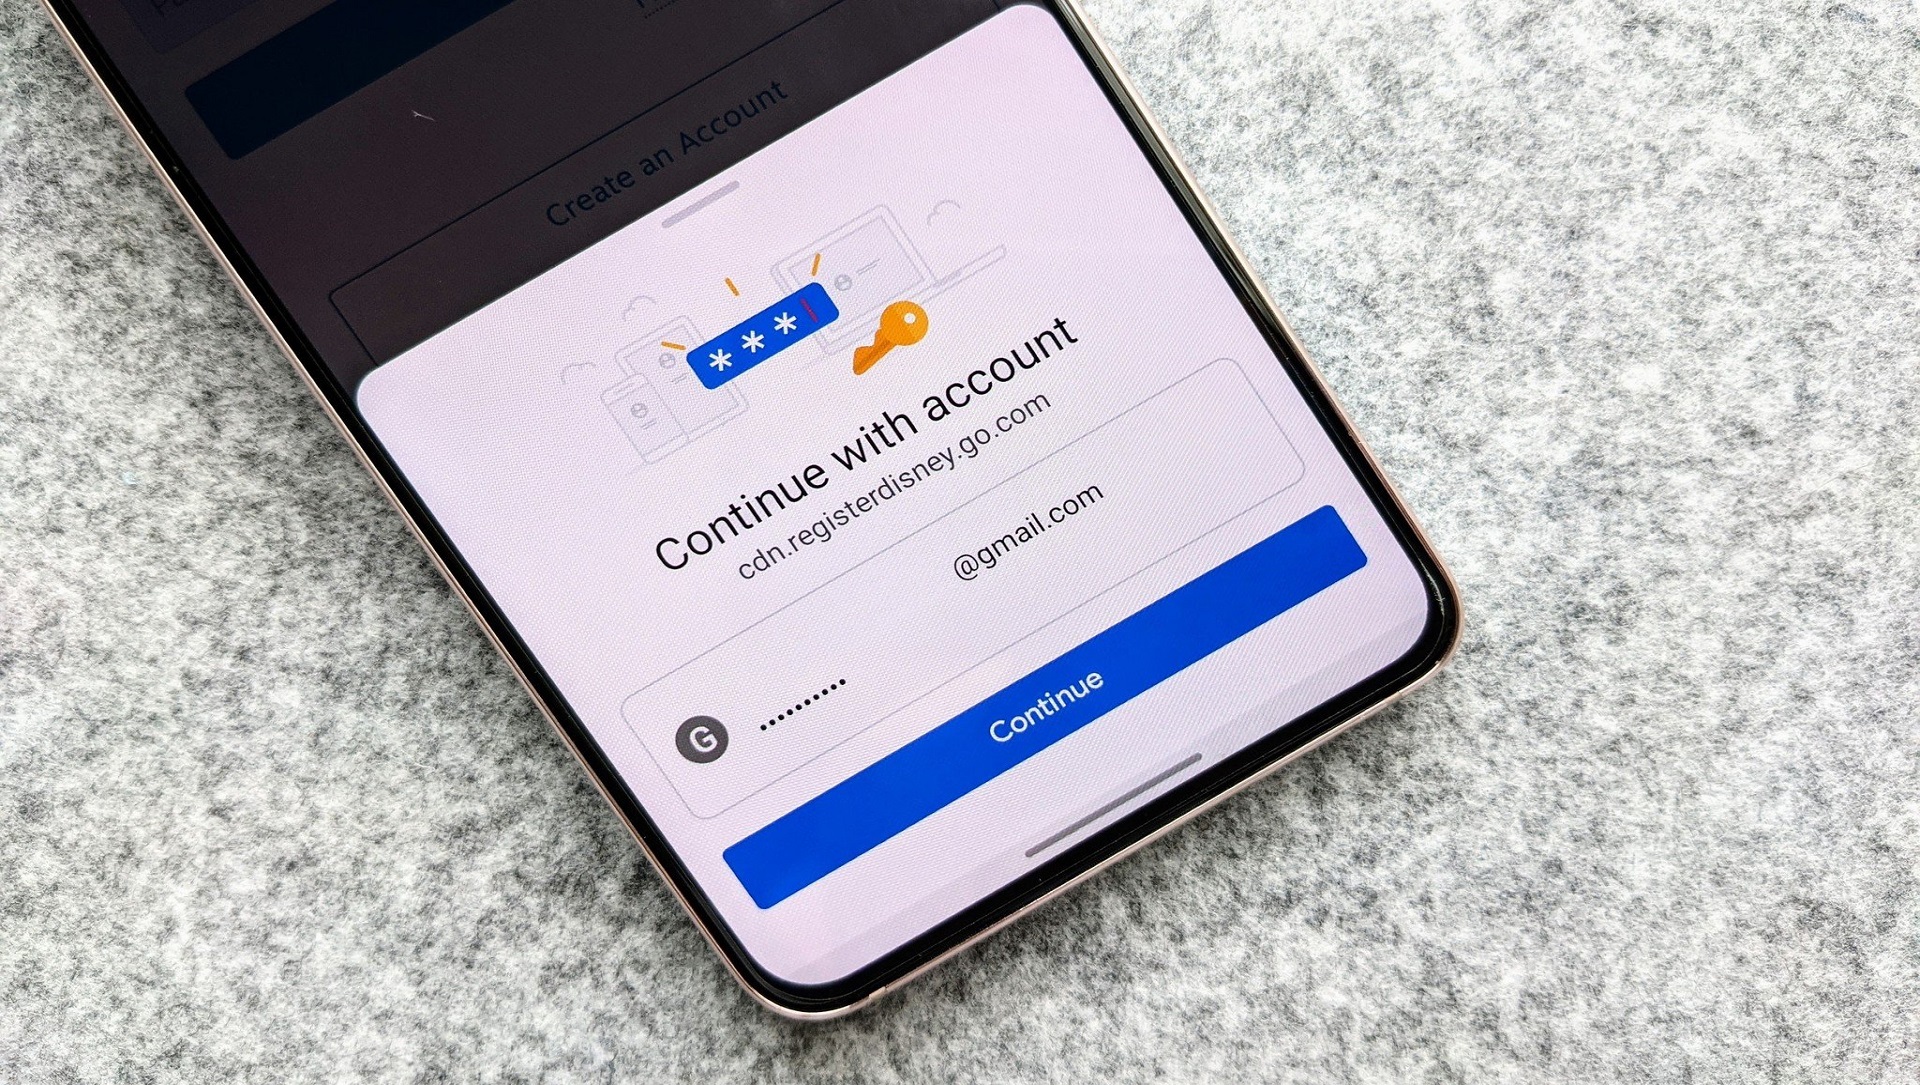 Google Password Manager: How To Get Faster Access To Your Credentials on Android Phones